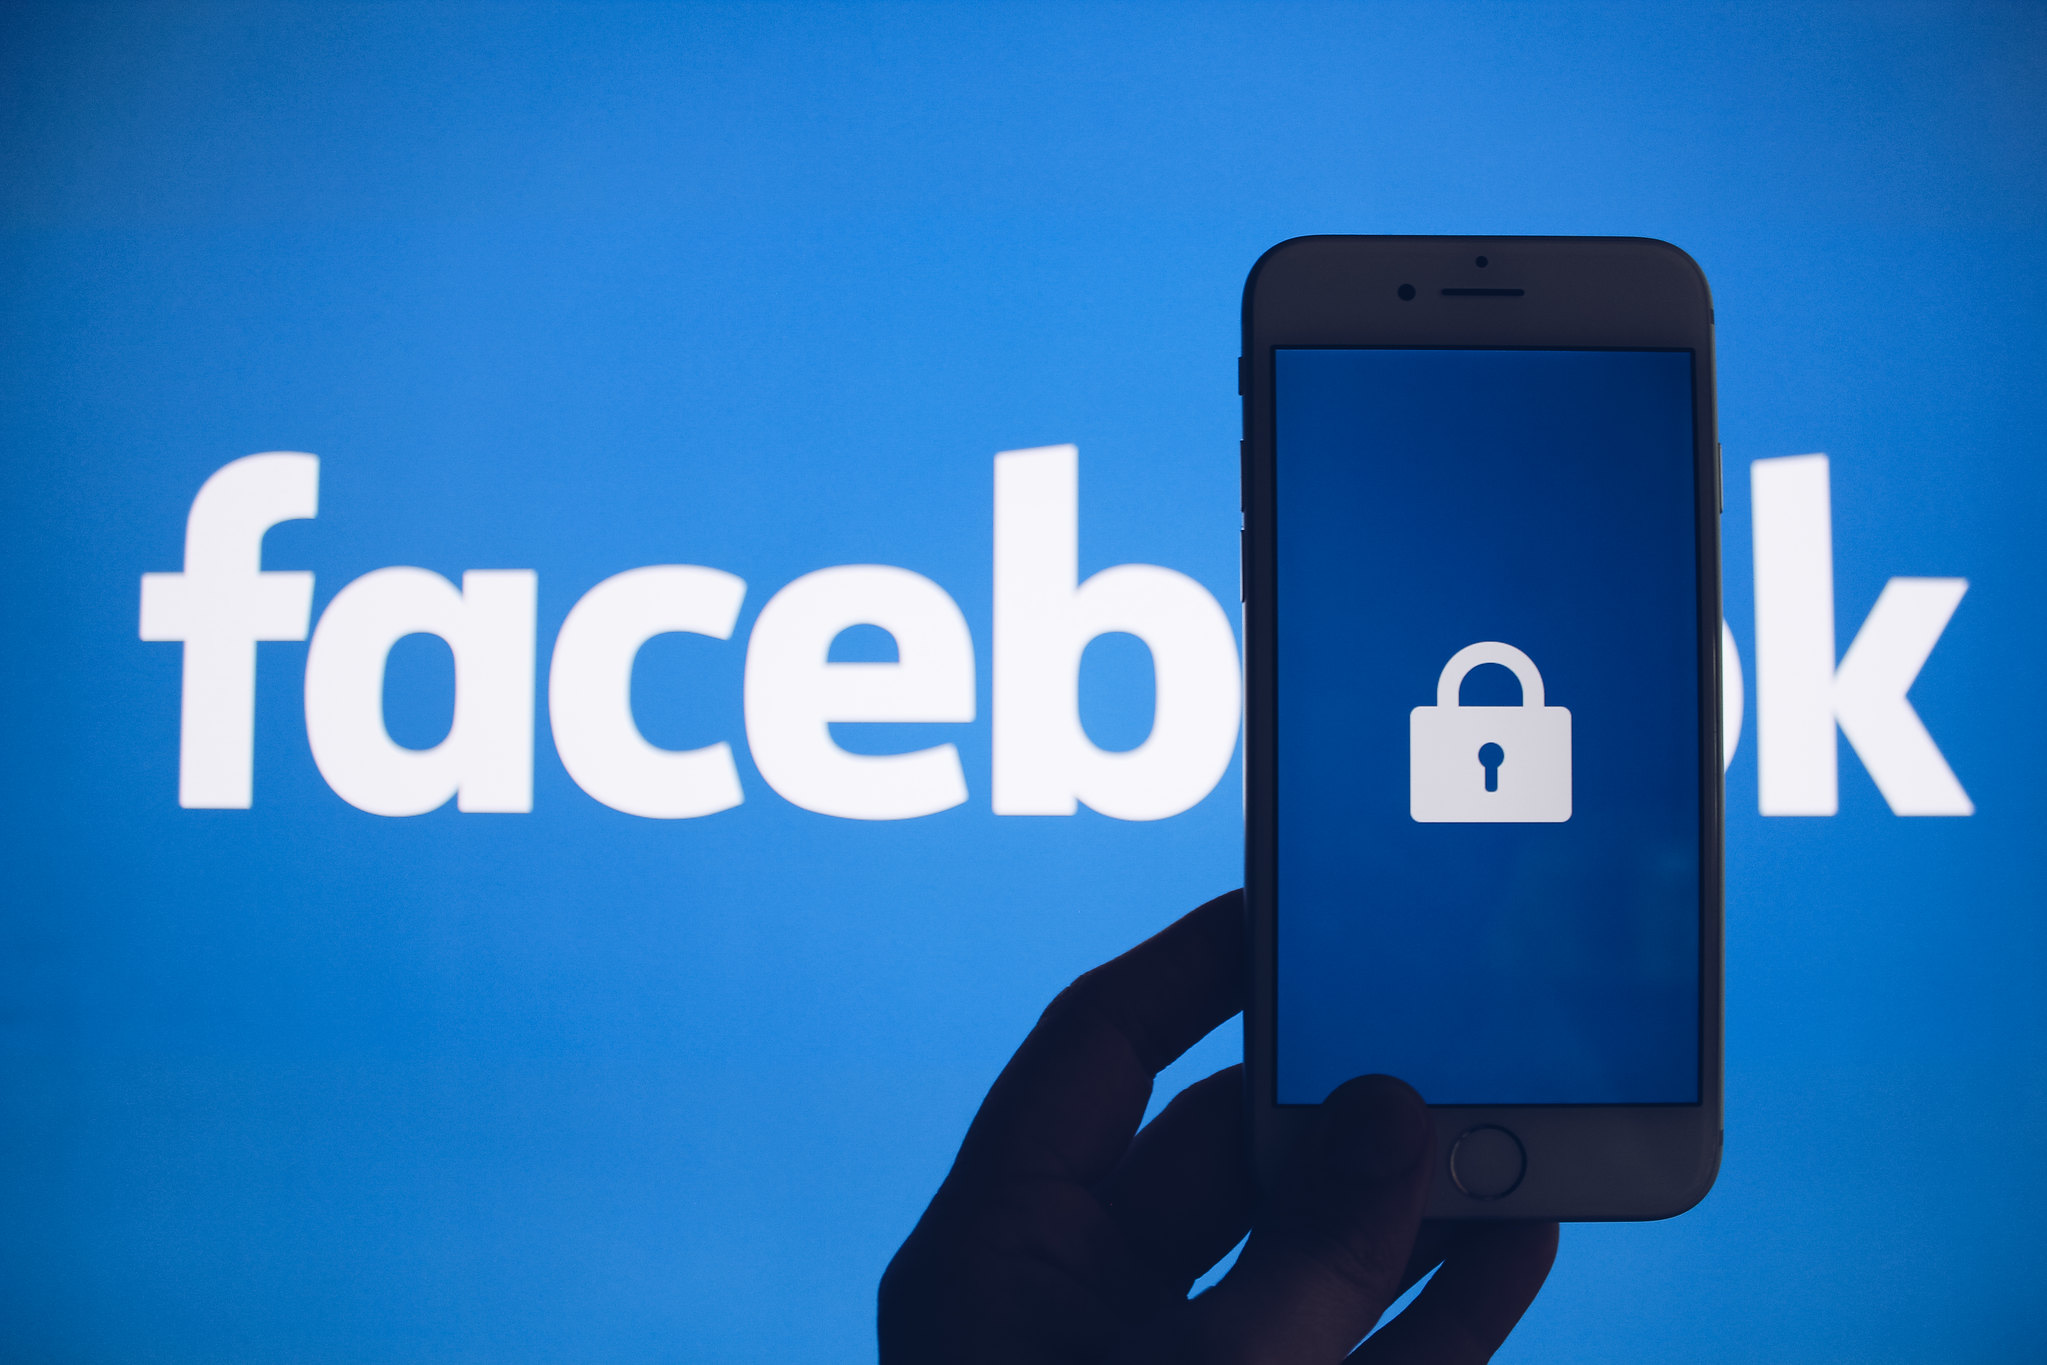 Image on a blue background which says "Facebook" with a hand holding a smartphone in front